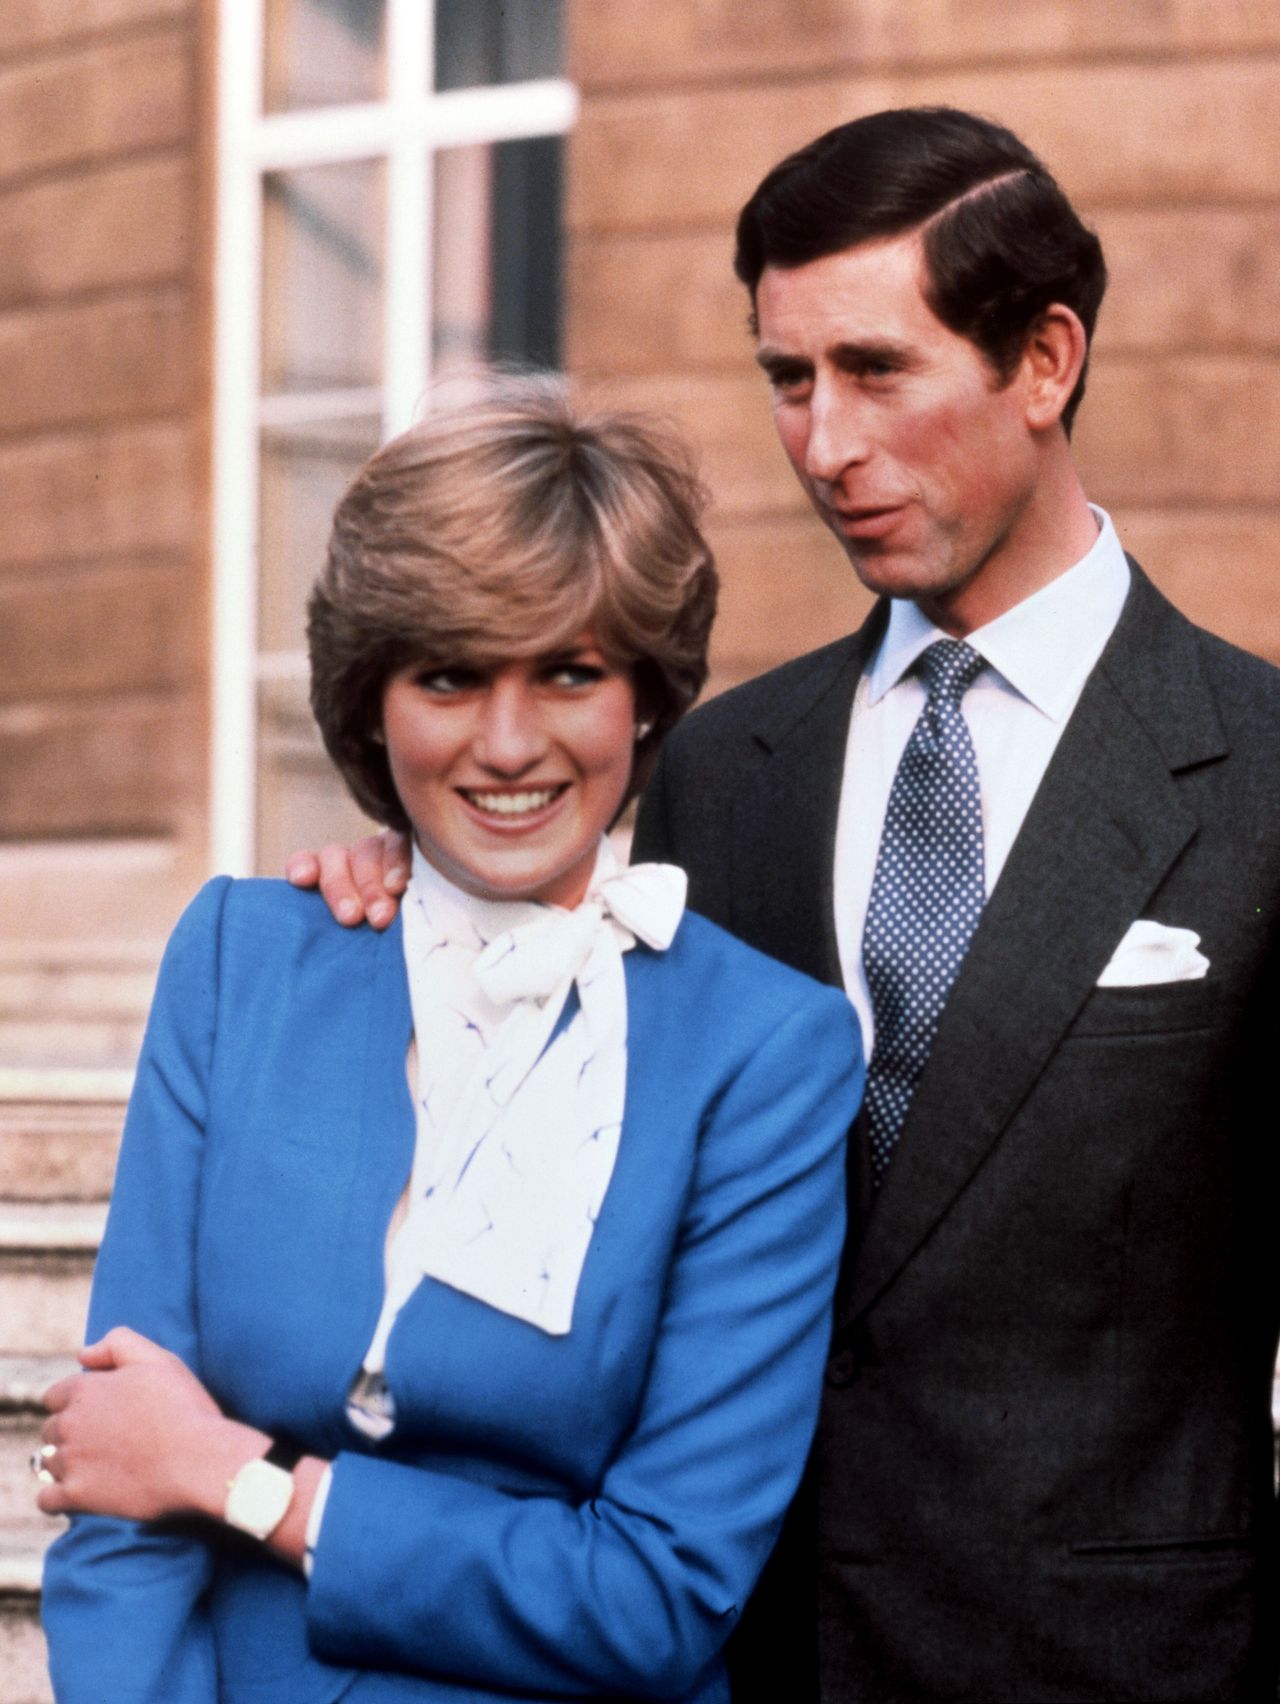 Prince Charles and Lady Diana Spencer on their engagement day at Buckingham Palace